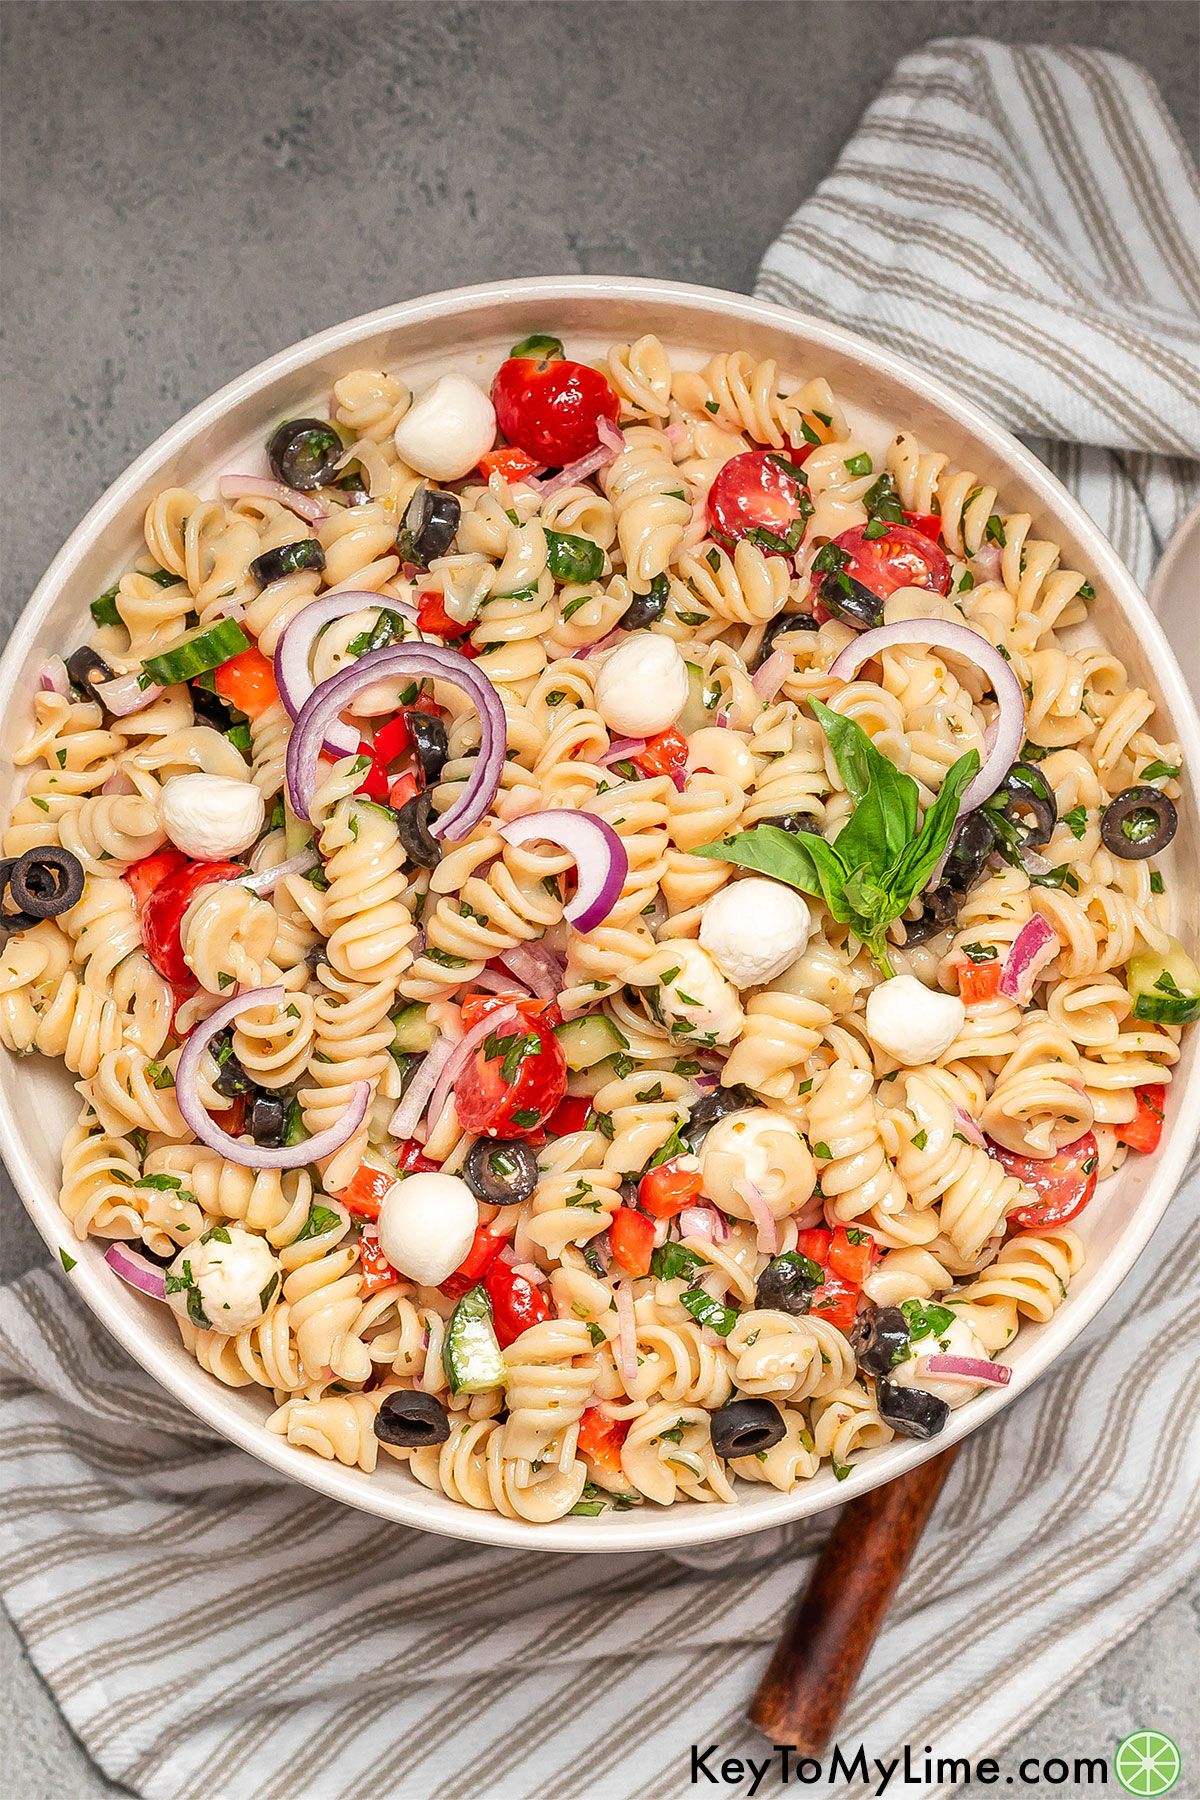 An image of pasta salad inside a large serving bowl on top of a striped napkin.